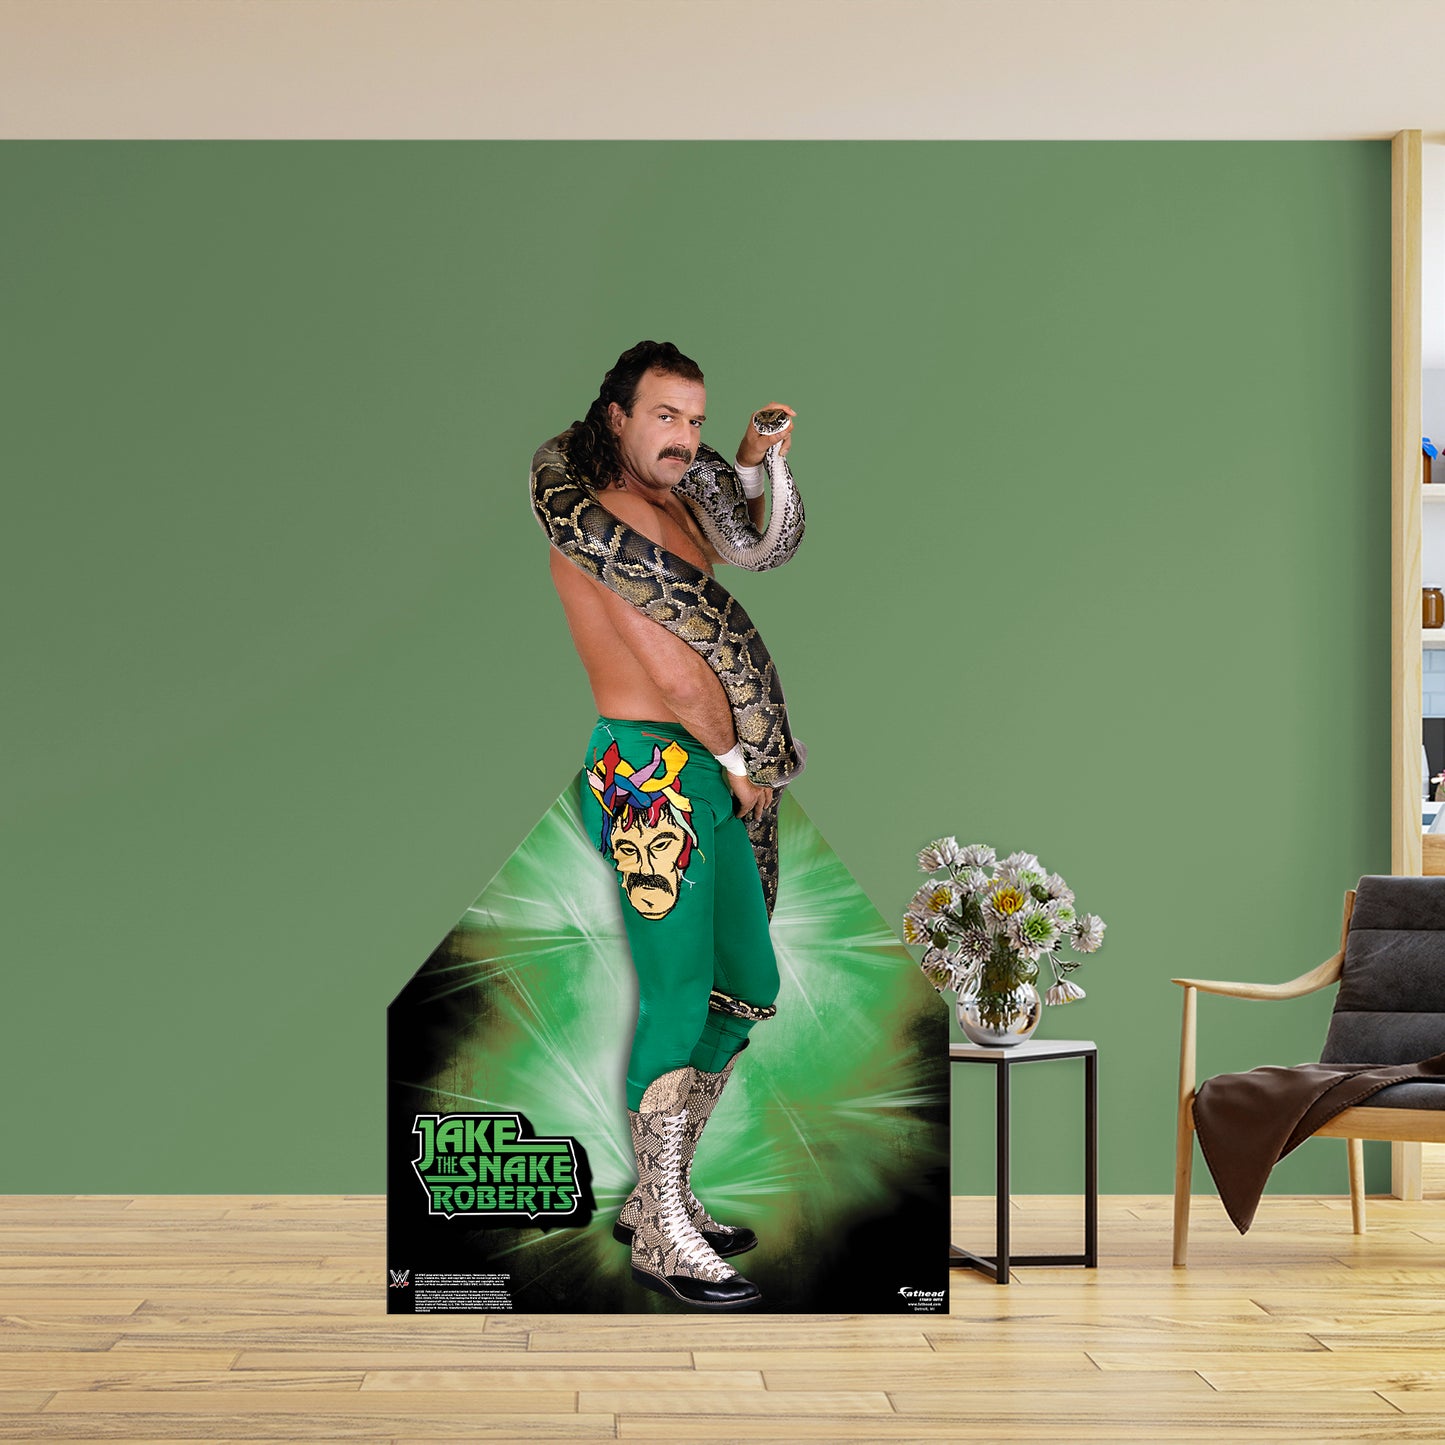 Jake The Snake Roberts Foam Core Cutout - Officially Licensed WWE Stand Out